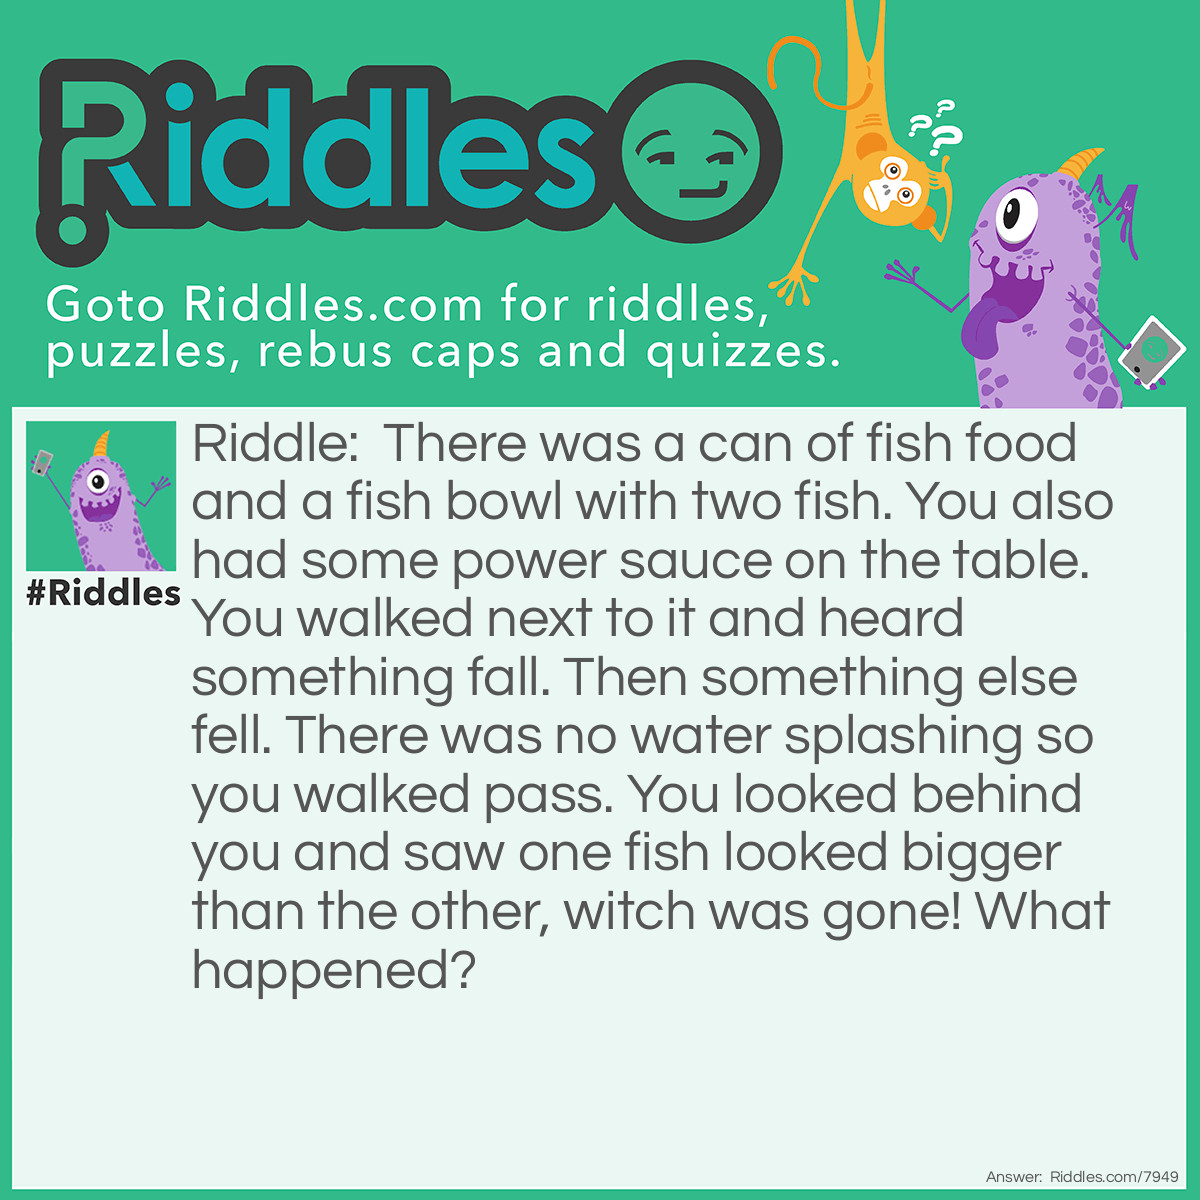 Riddle: There was a can of fish food and a fish bowl with two fish. You also had some power sauce on the table. You walked next to it and heard something fall. Then something else fell. There was no water splashing so you walked pass. You looked behind you and saw one fish looked bigger than the other, witch was gone! What happened? Answer: While you were walking, you knocked the can of power sauce and fish food into the fish bowl. One fish ate all the fish food and became fat. The other ate the power sauce and got enough power to jump out.